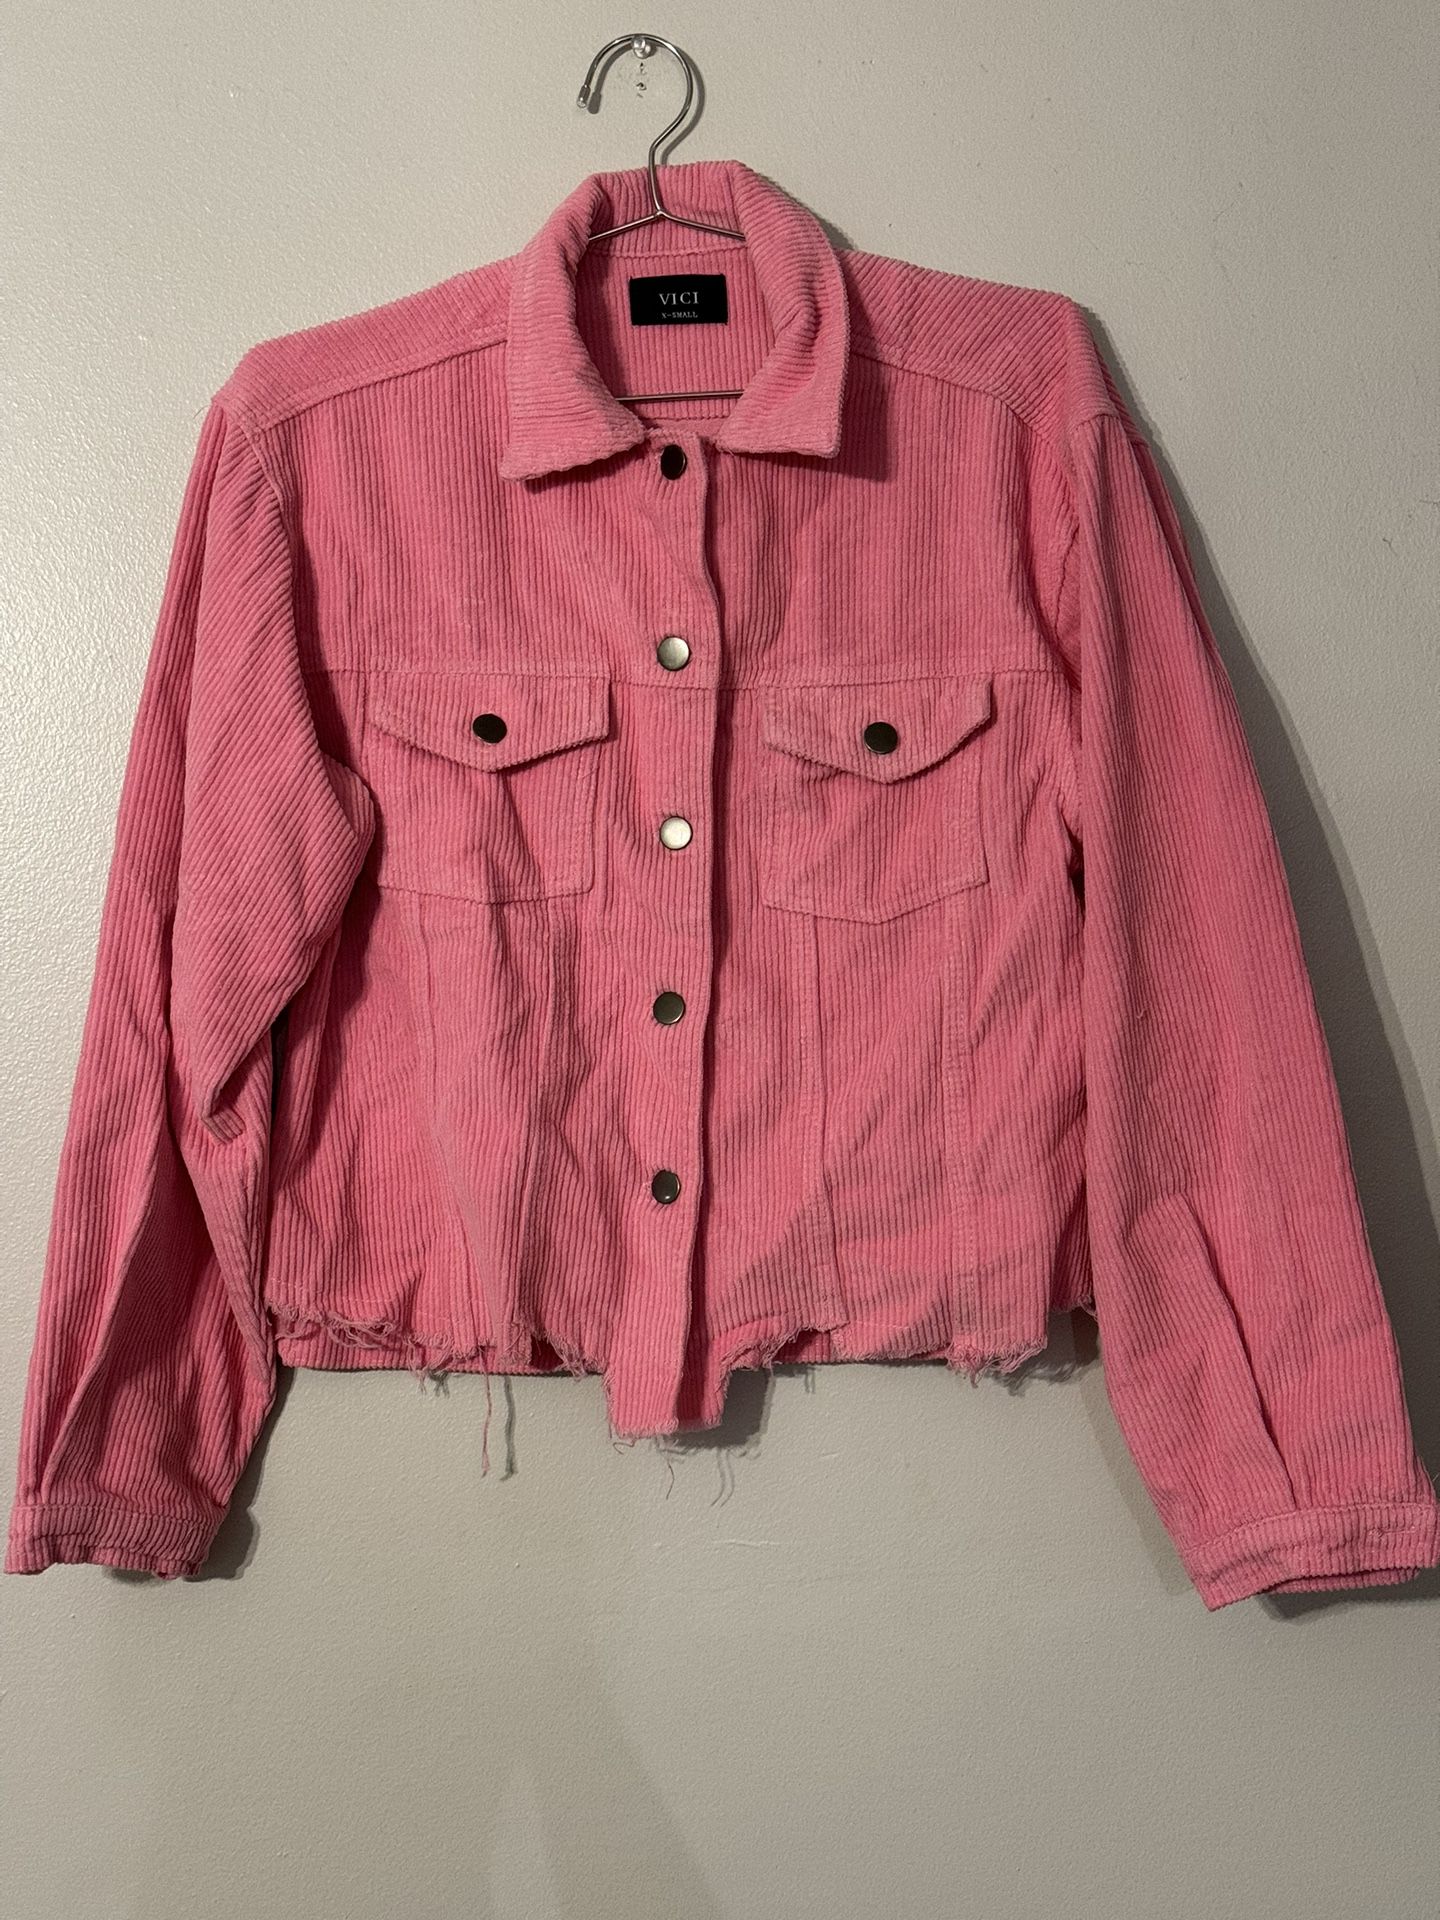 Vici Pink Corduroy Womens XS Jacket Button Closure Fall Winter Cozy Comfy